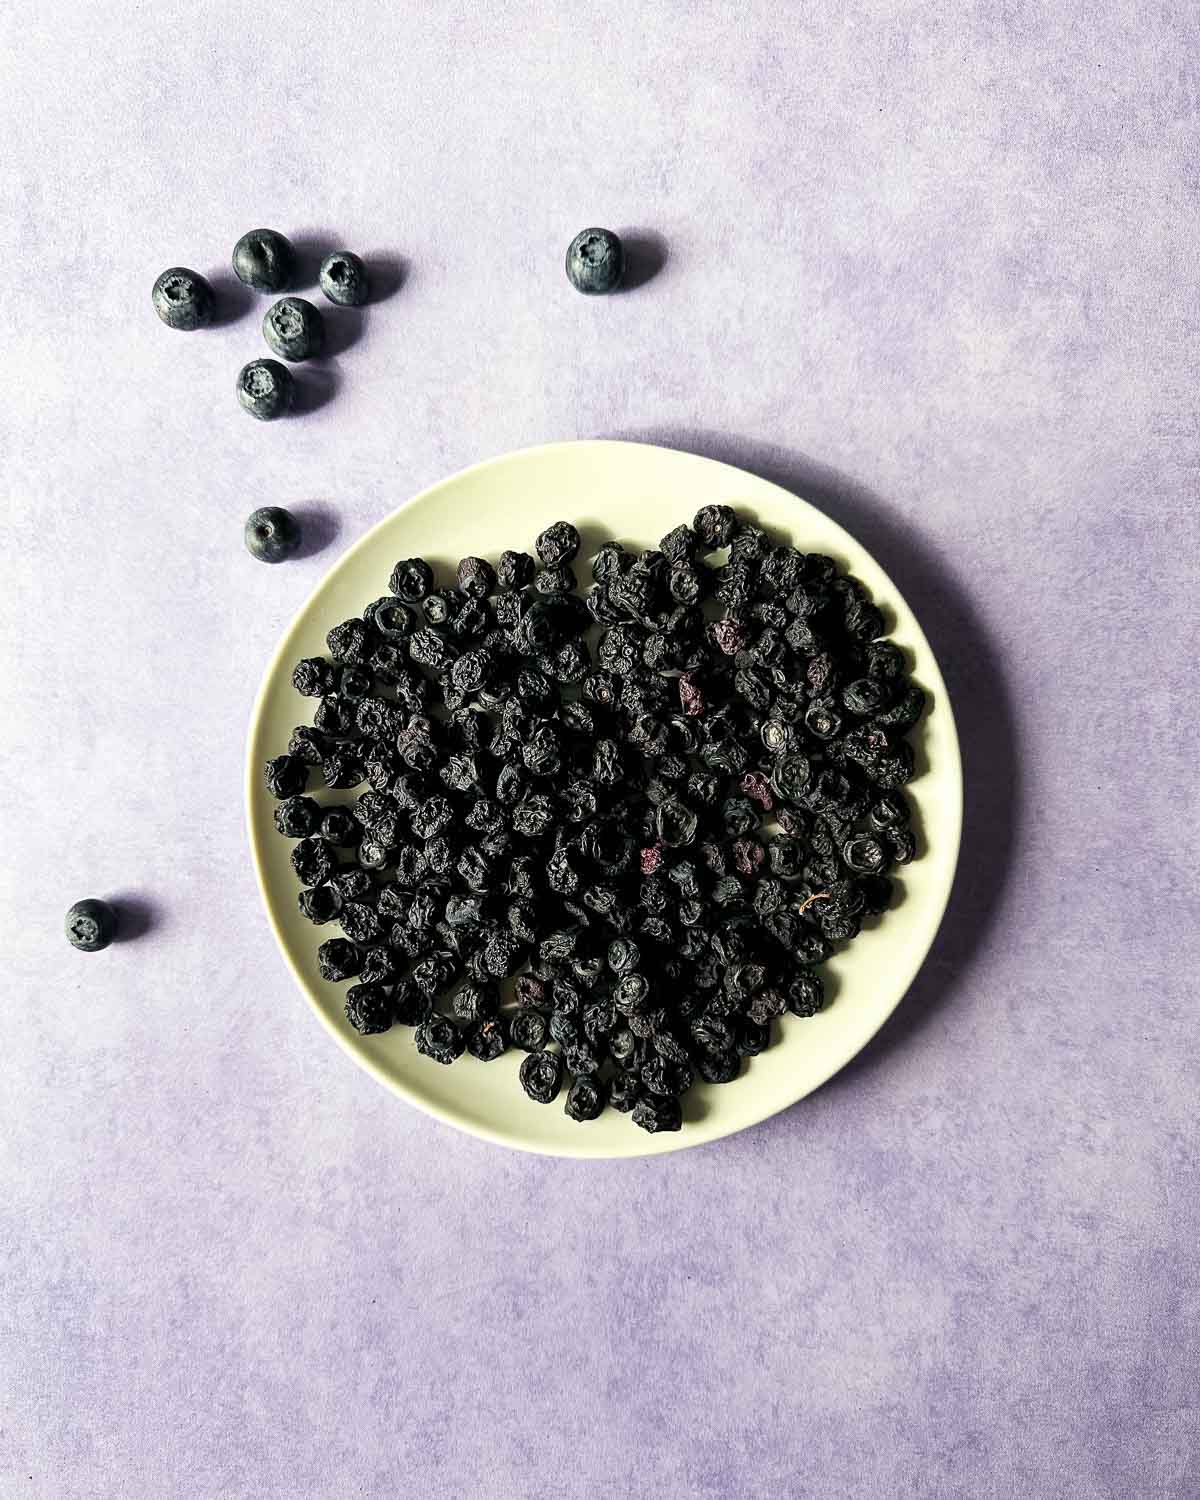 Air fryer dehydrated blueberries on a white plate on a purple backdrop surrounded by fresh blueberries.